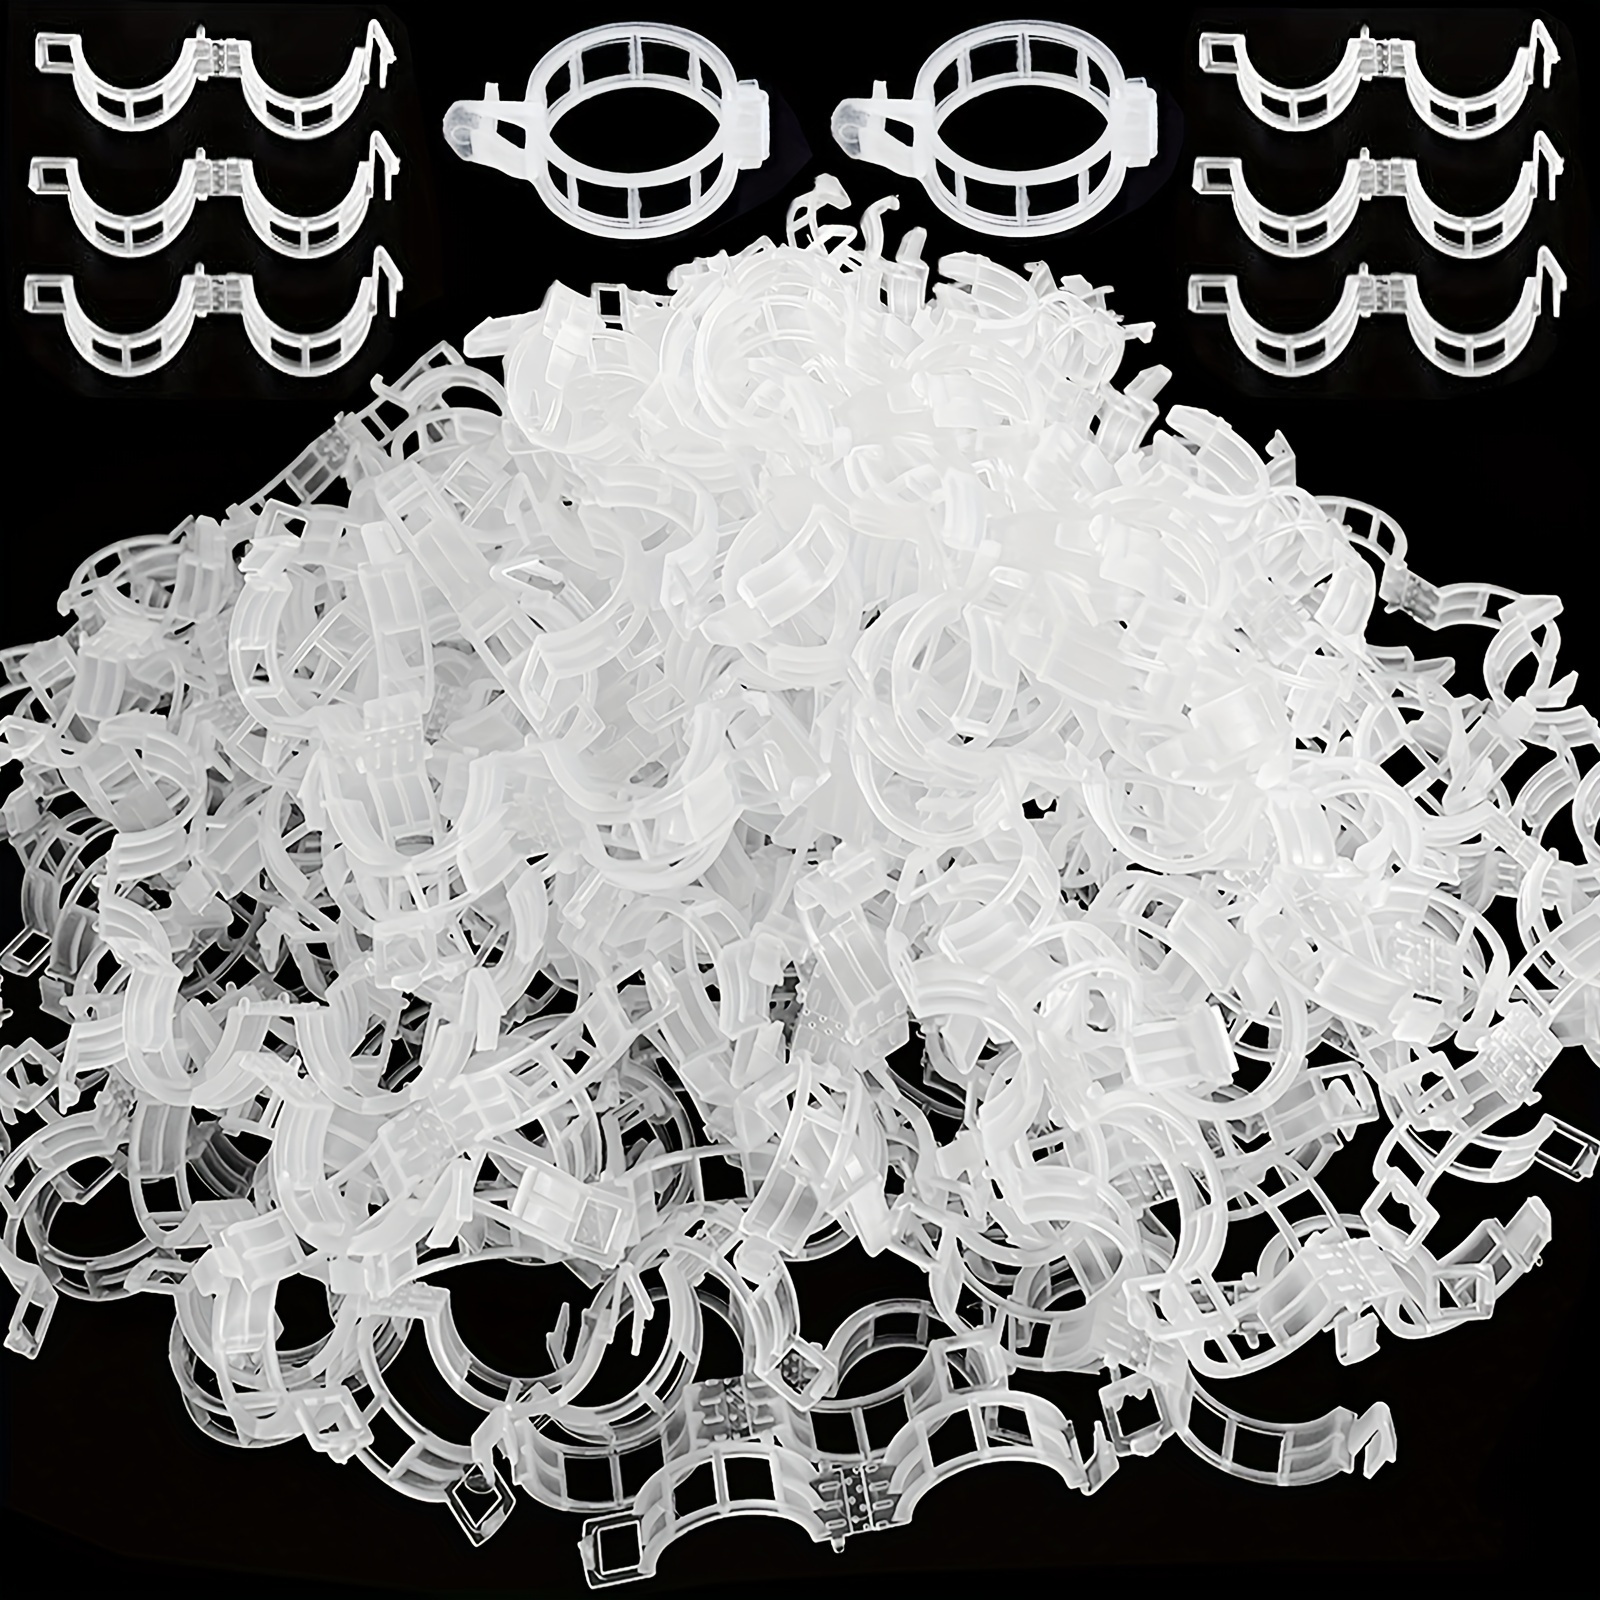 

300pcs, Plant Support Garden Clips, Garden Support Clips, Garden Tomato Trellis Clips In White For Vine Vegetables Tomato To Grow Upright And Makes Plants Healthier